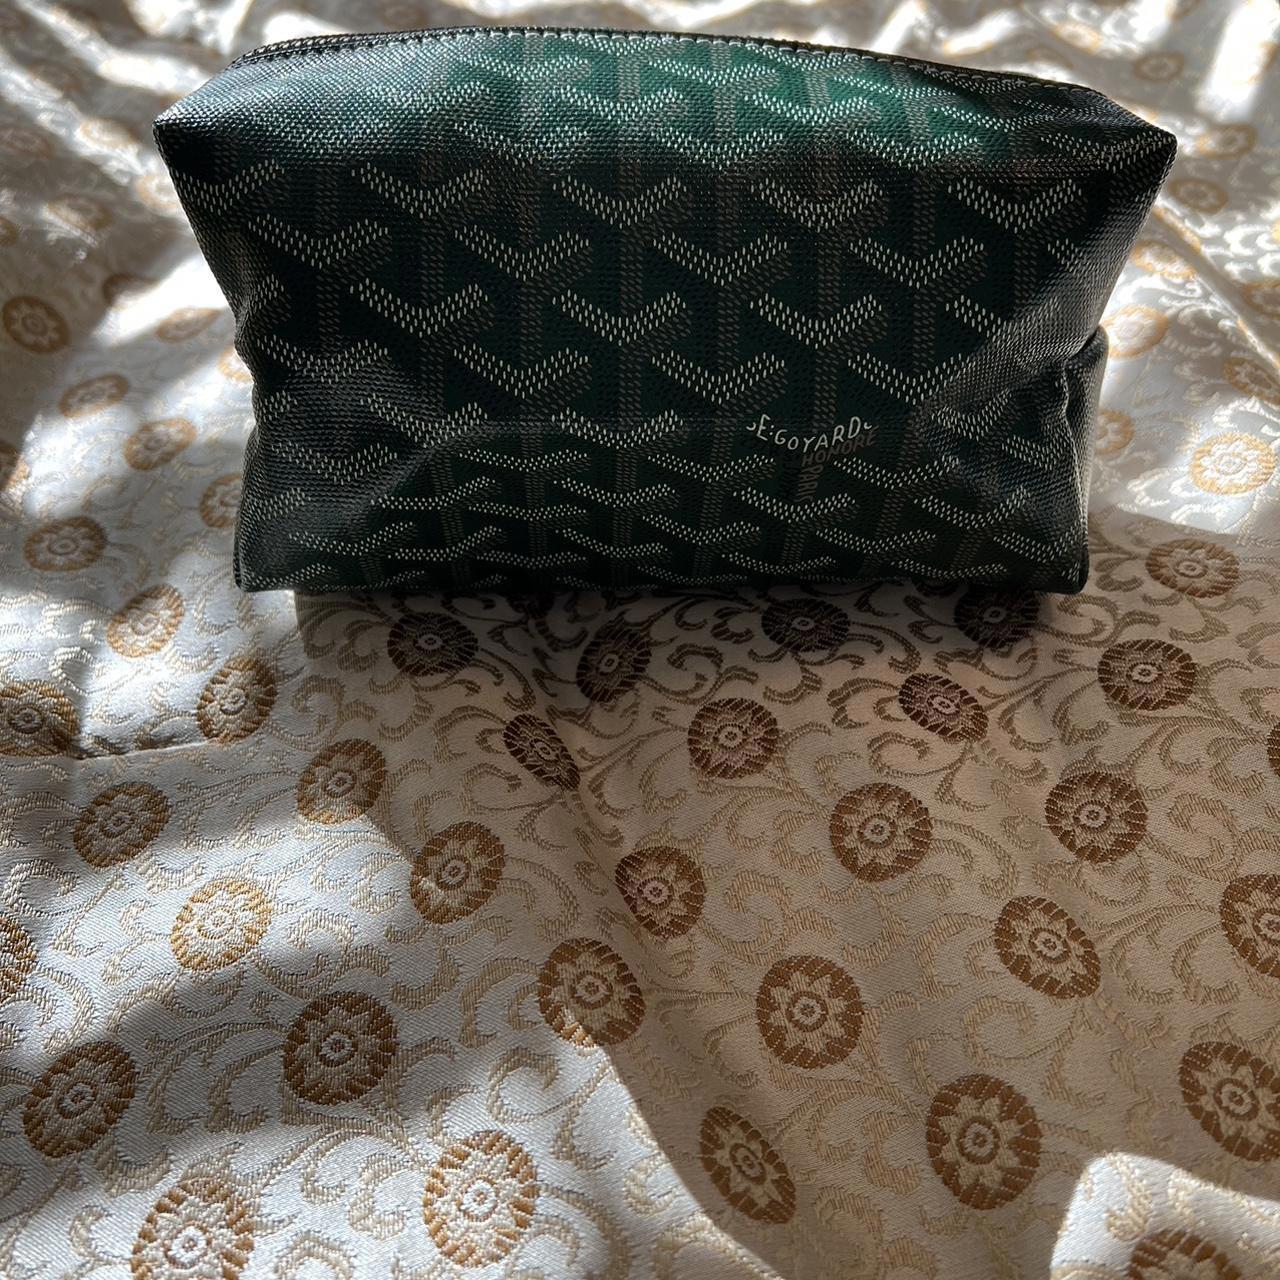 Brand new with tags, 100% Authentic Goyard Saint St. - Depop